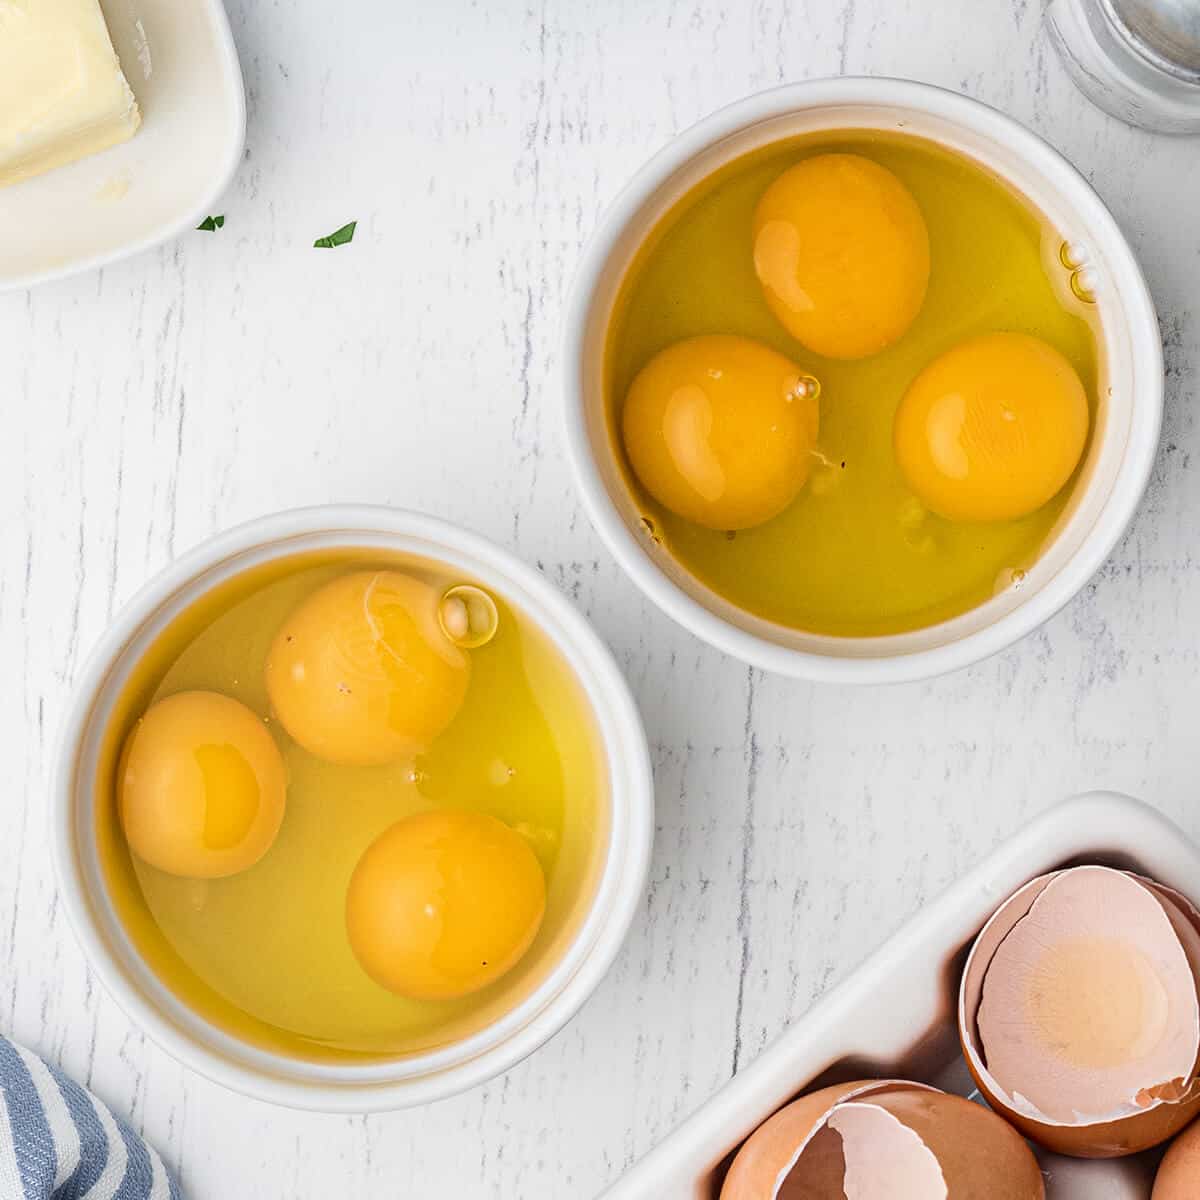 Six eggs cracked into two small bowls.